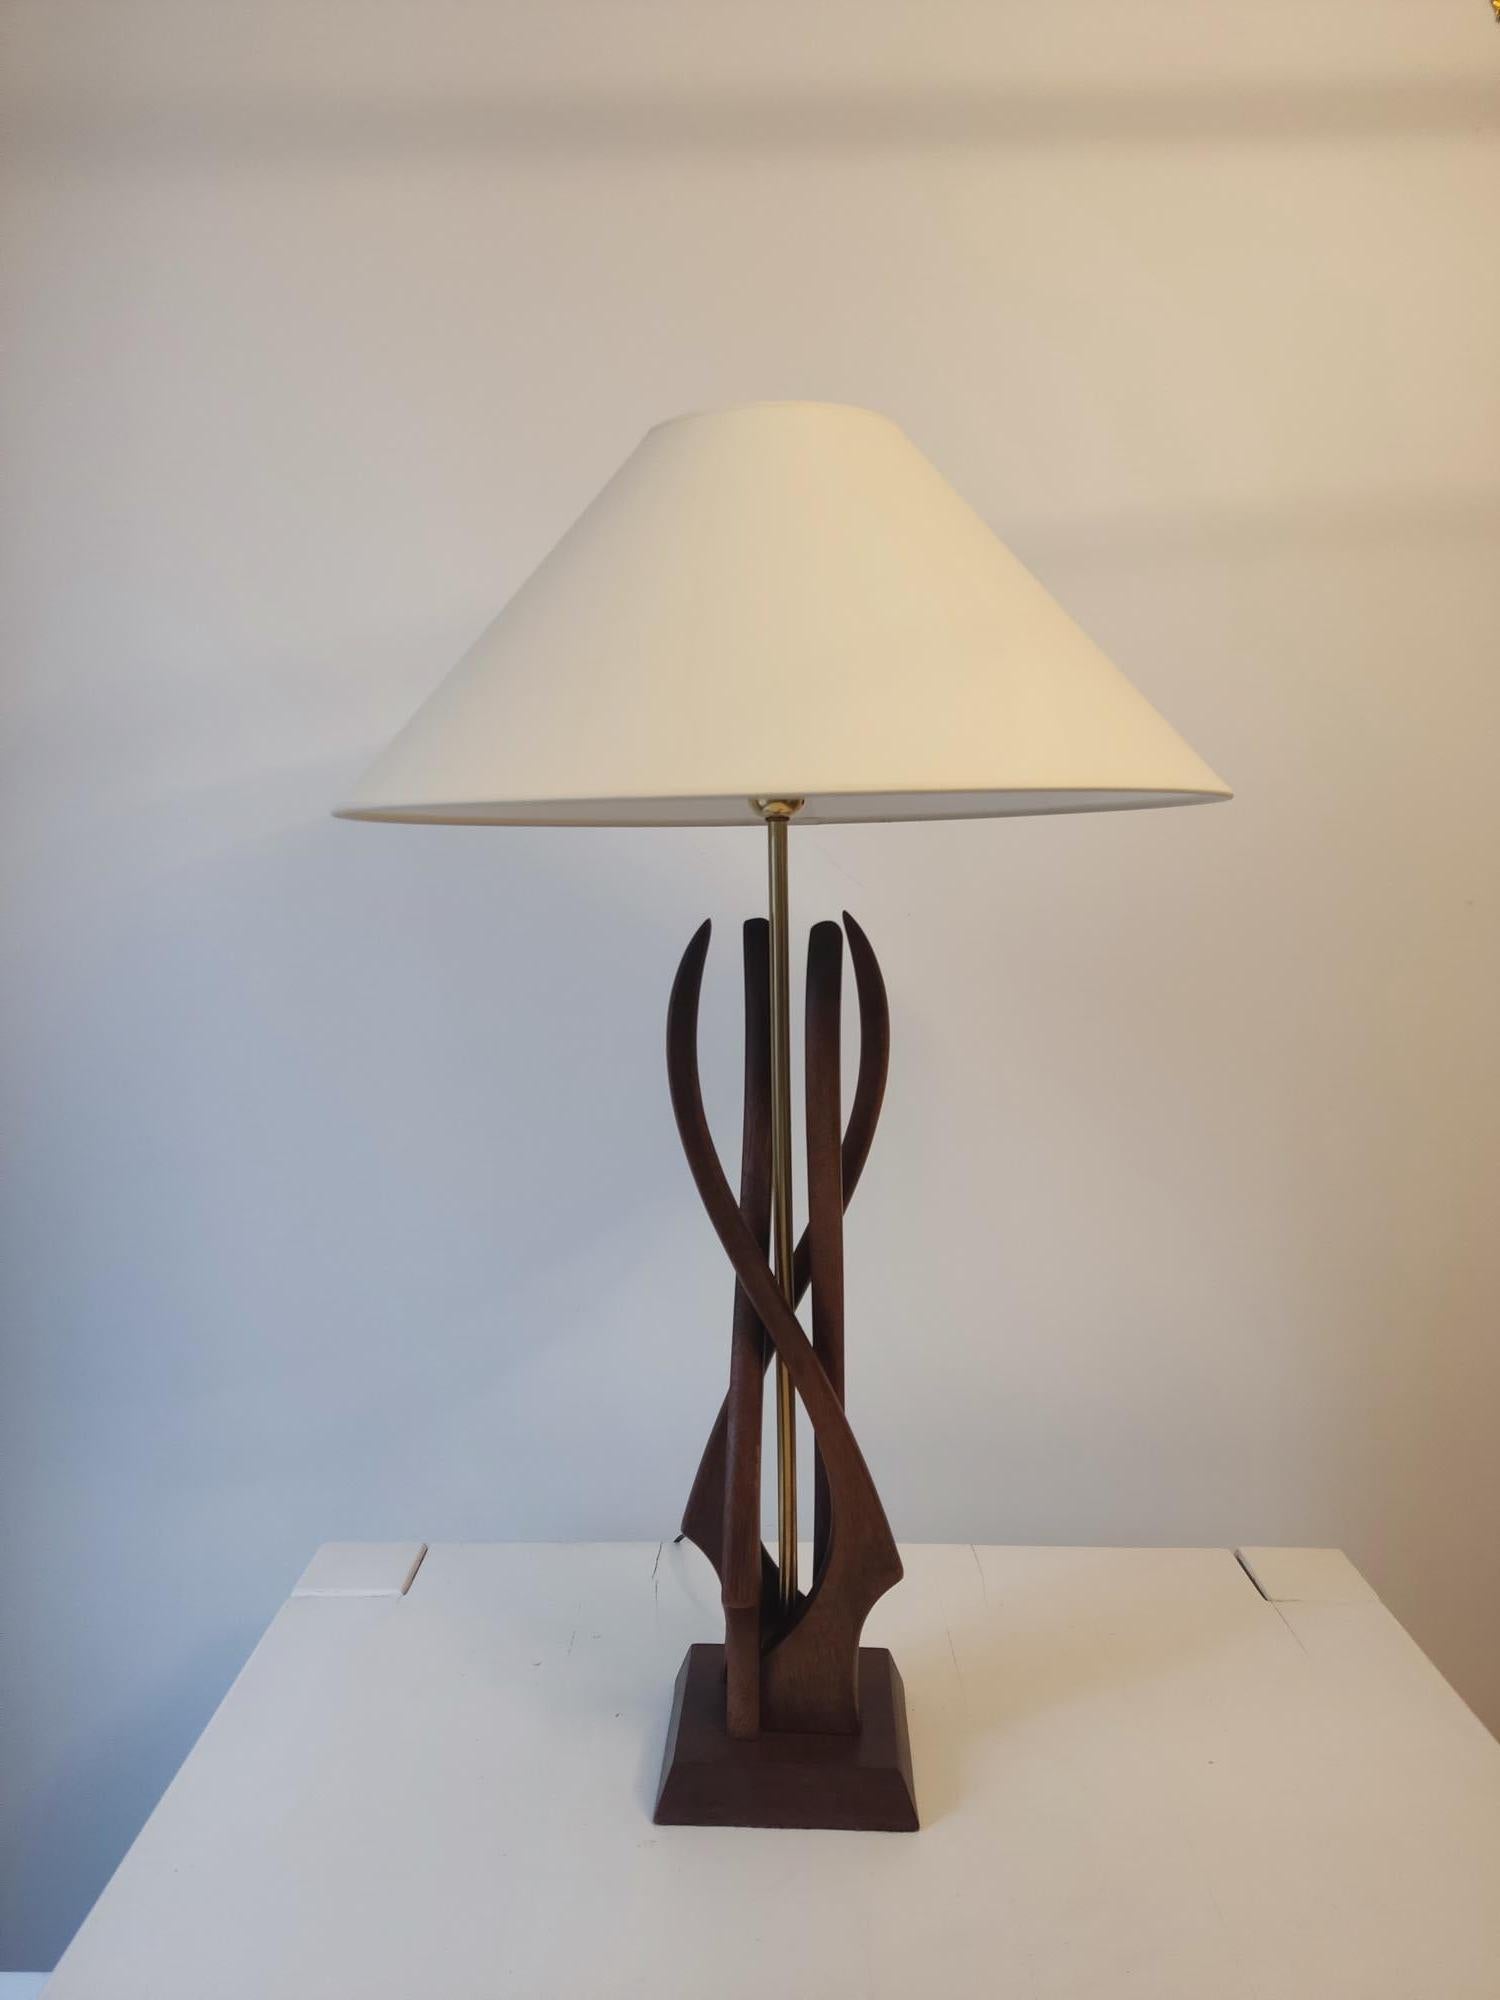 Pair of large vintage lamps from the mid-20th century from the United States. Organic structure in walnut wood accompanied by a brass rod. The Tonkinese lampshade as well as the electrical system are new to European standards.
These tall lamps will